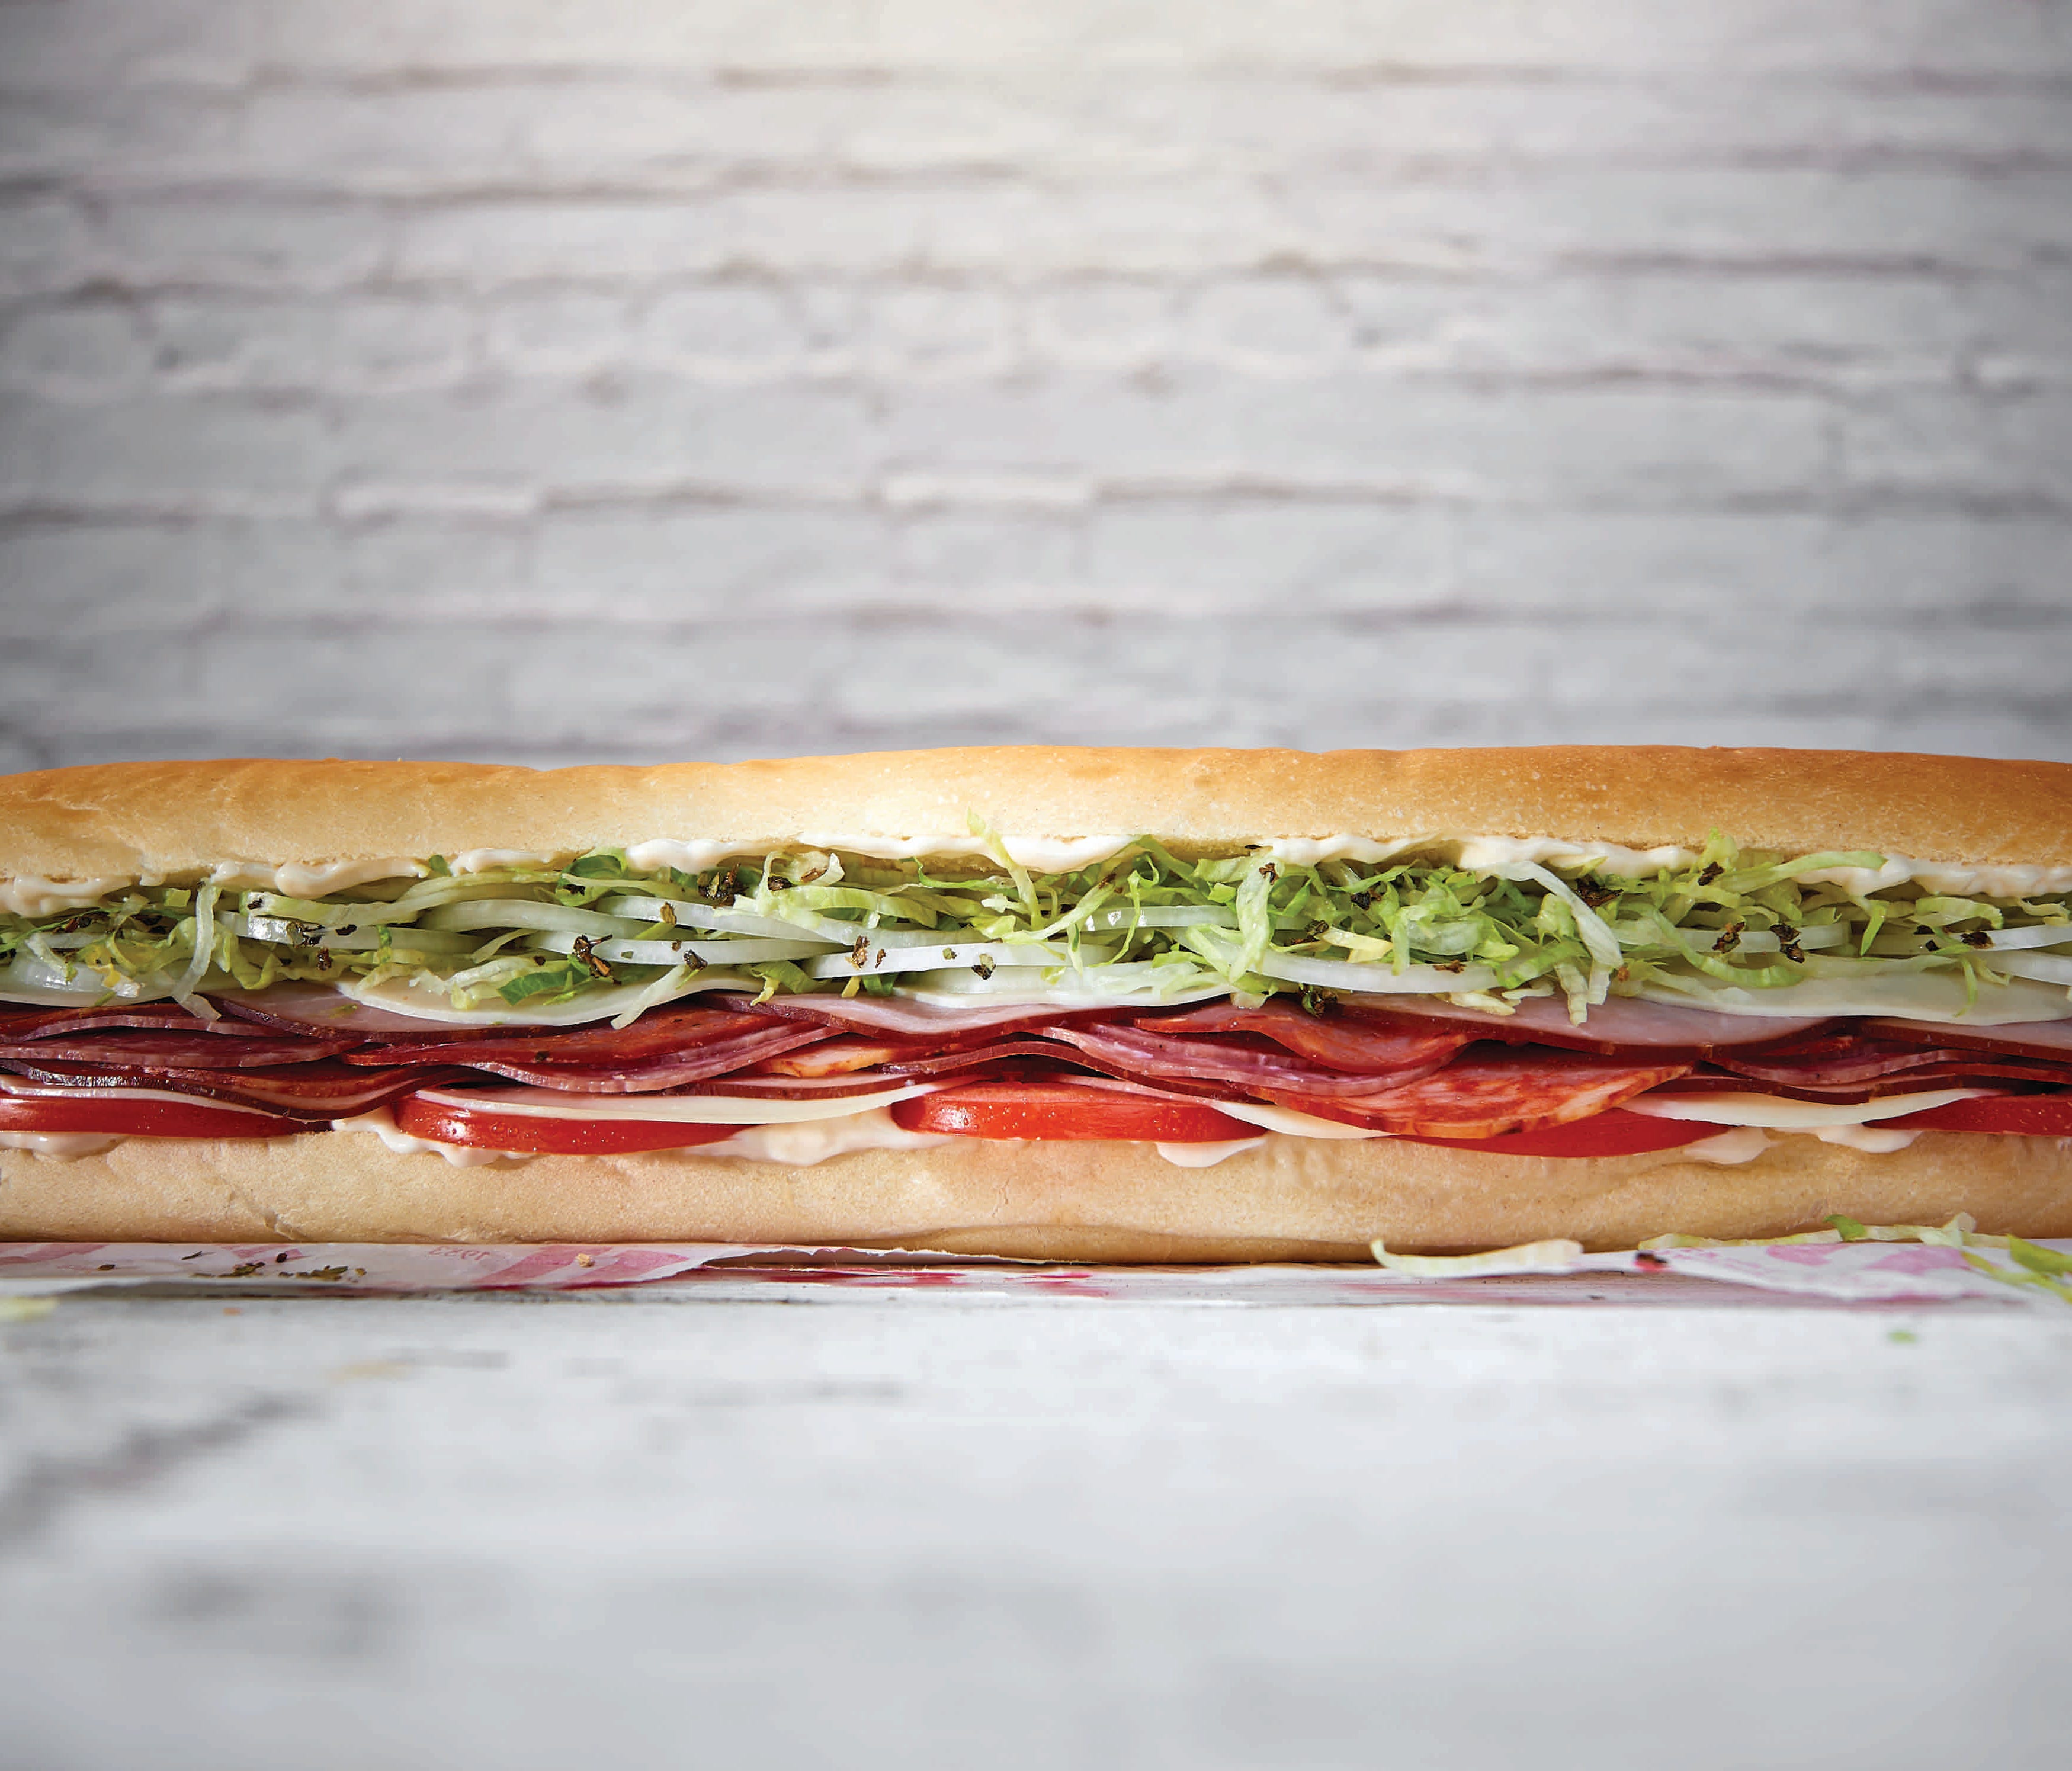 Jimmy John's has expanded its menu with new 16-inch sandwiches.